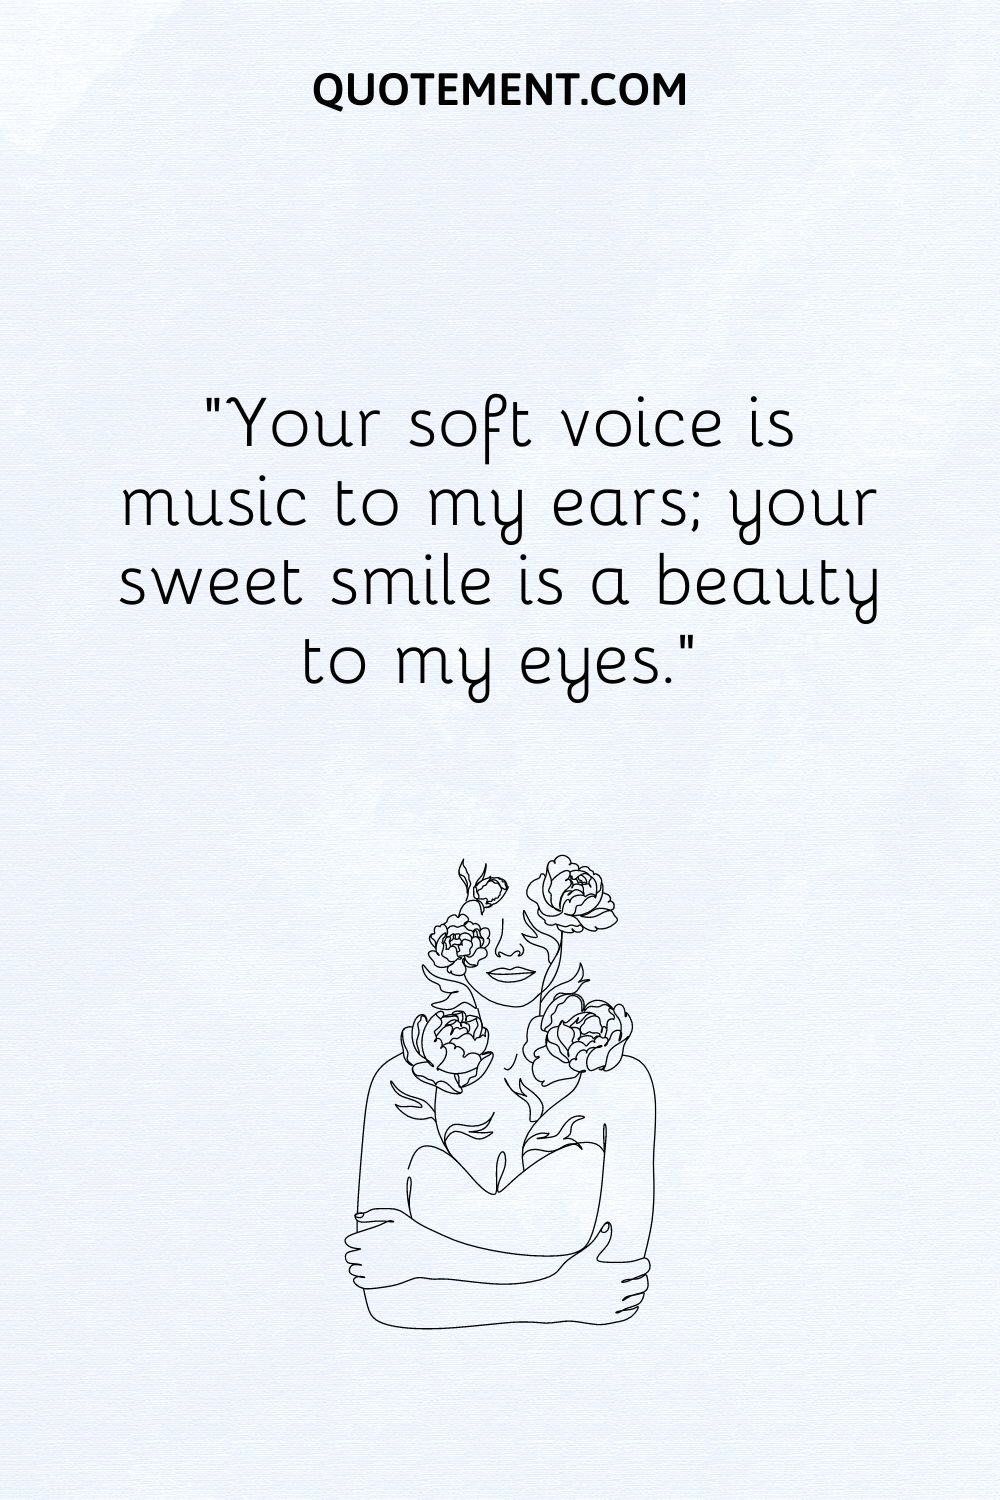 Your soft voice is music to my ears; your sweet smile is a beauty to my eyes